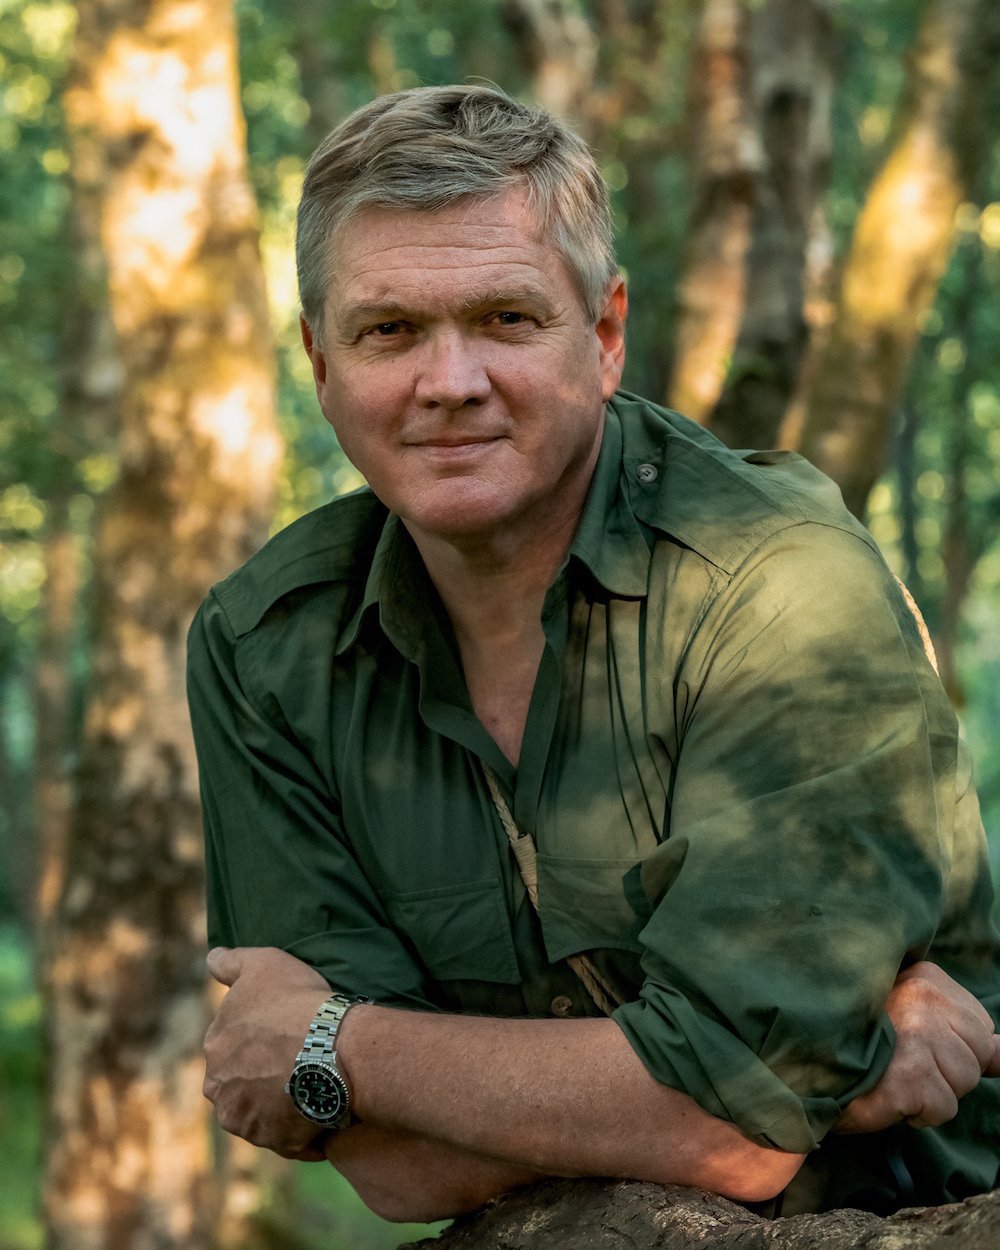 Muddy meets Ray Mears